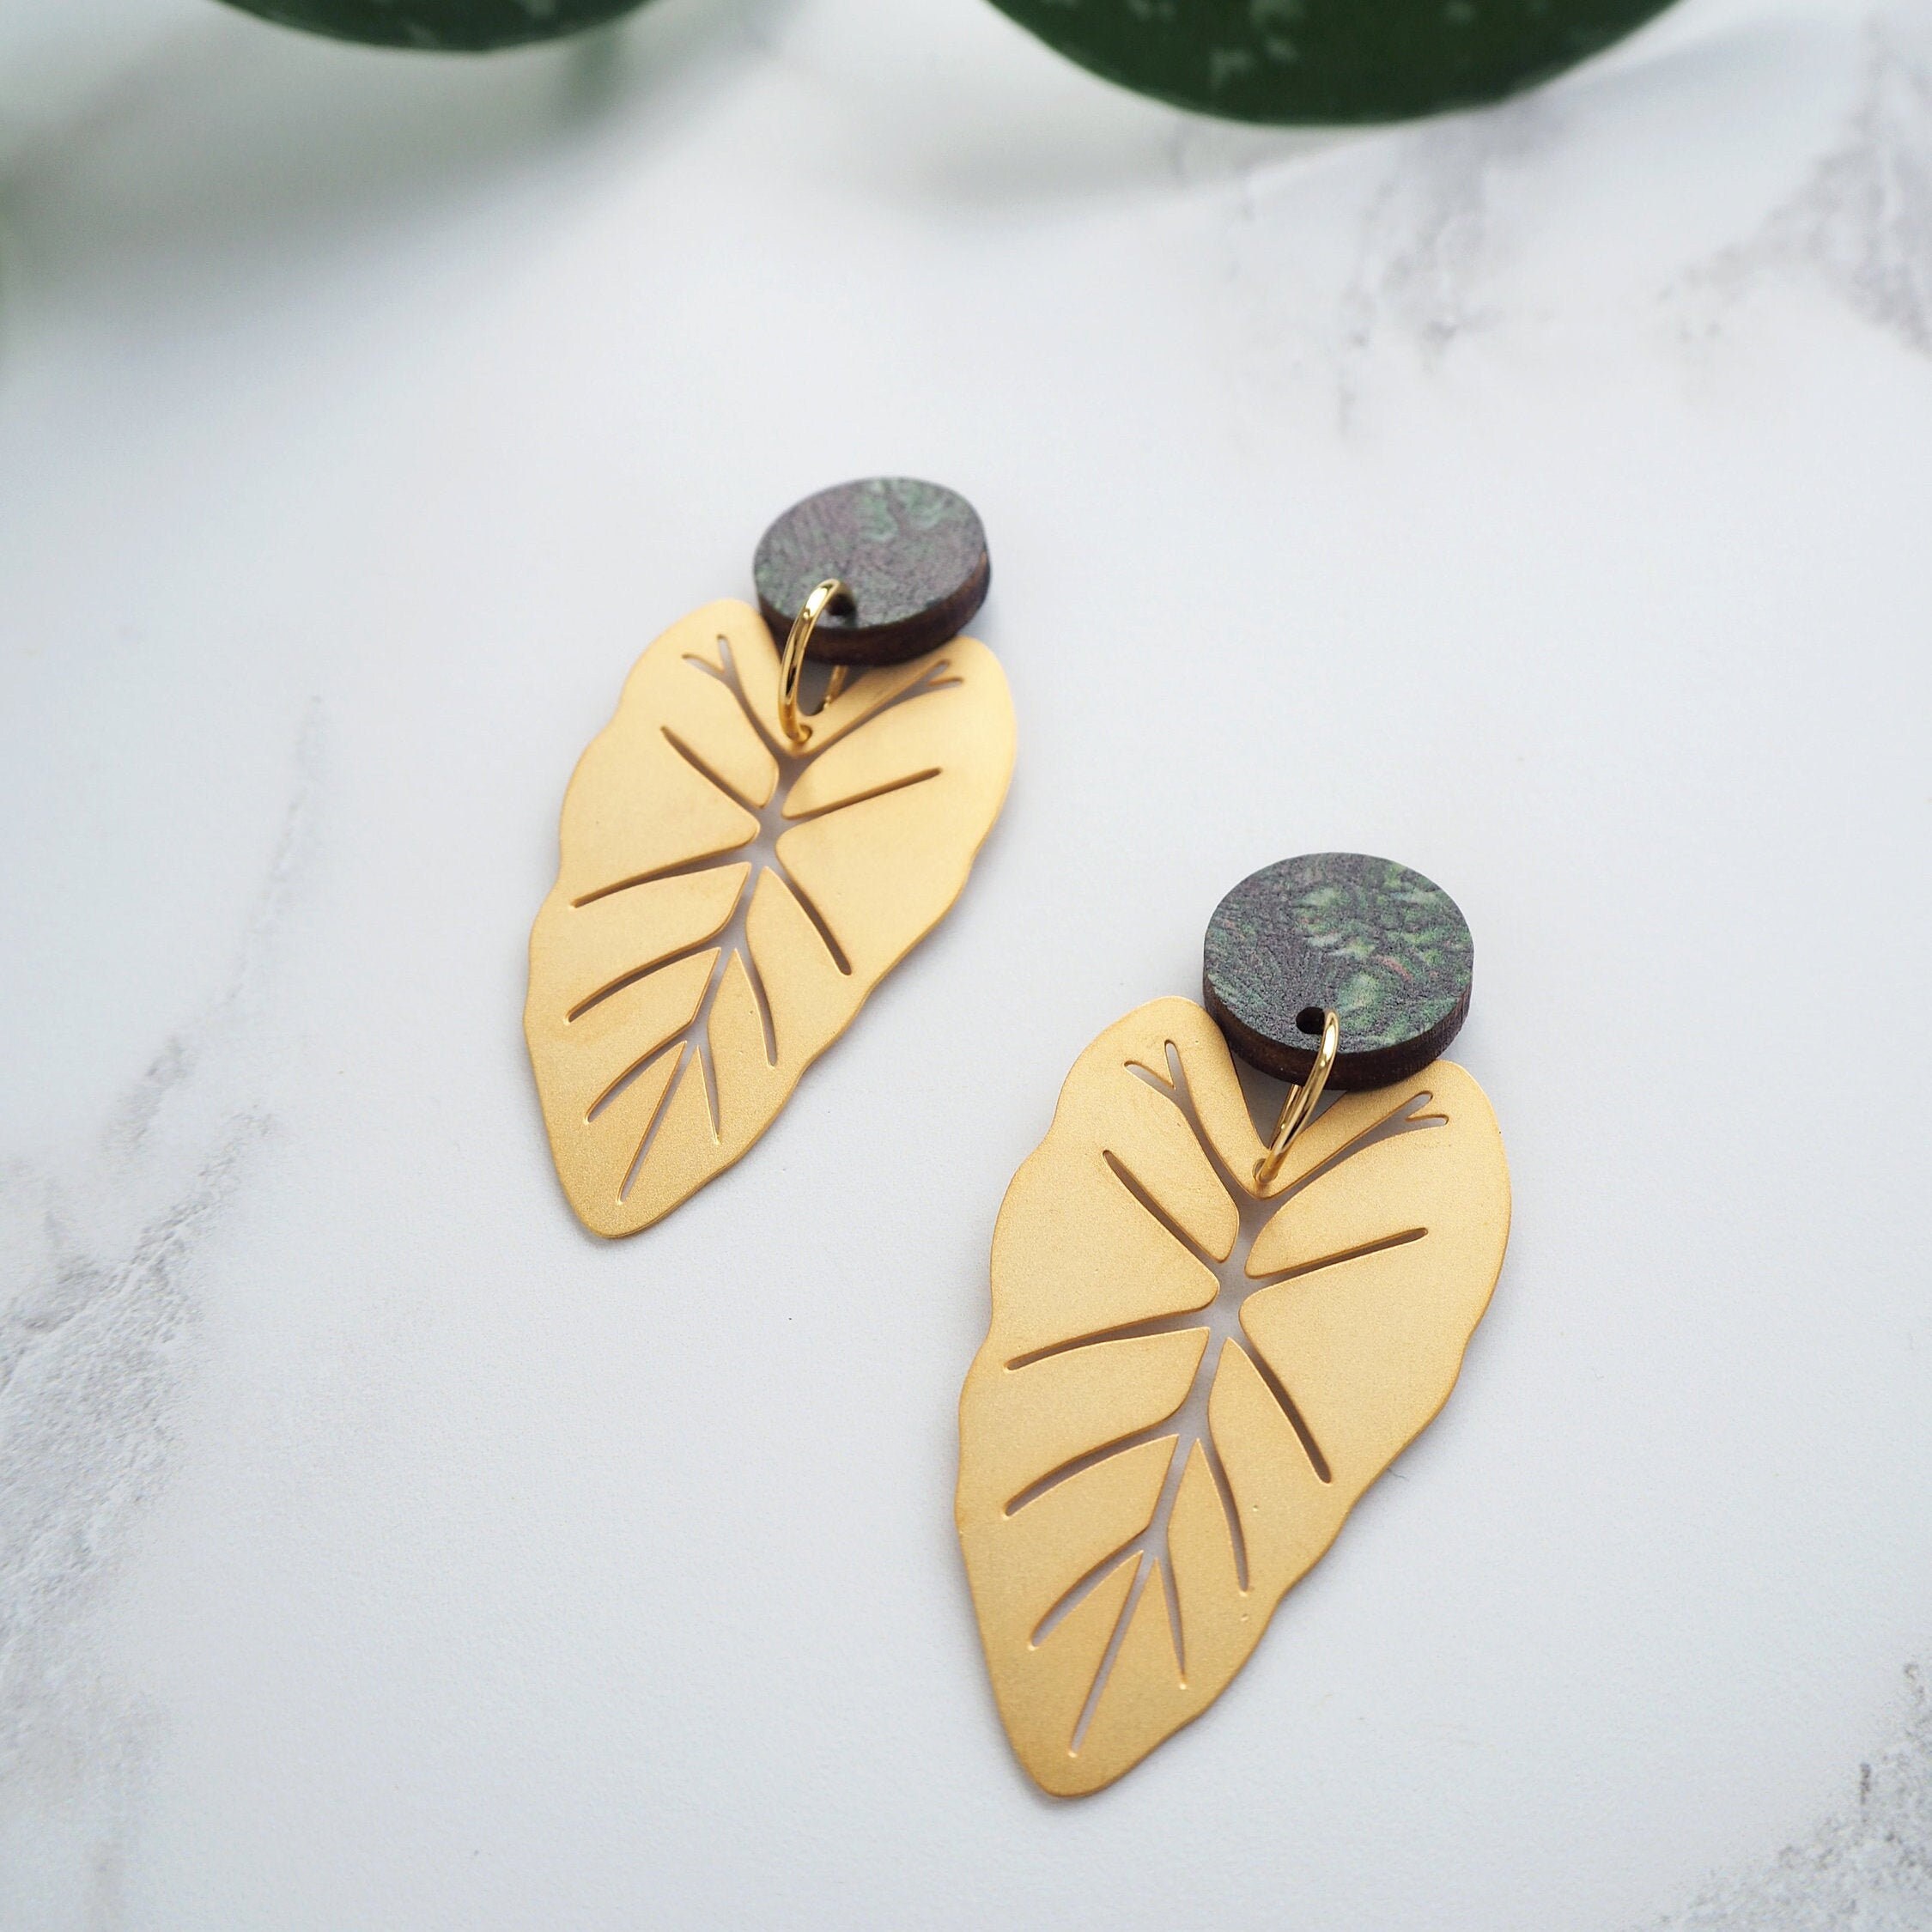 Statement Gold Alocasia Earrings - Drop Stud Leaf Gift For Her